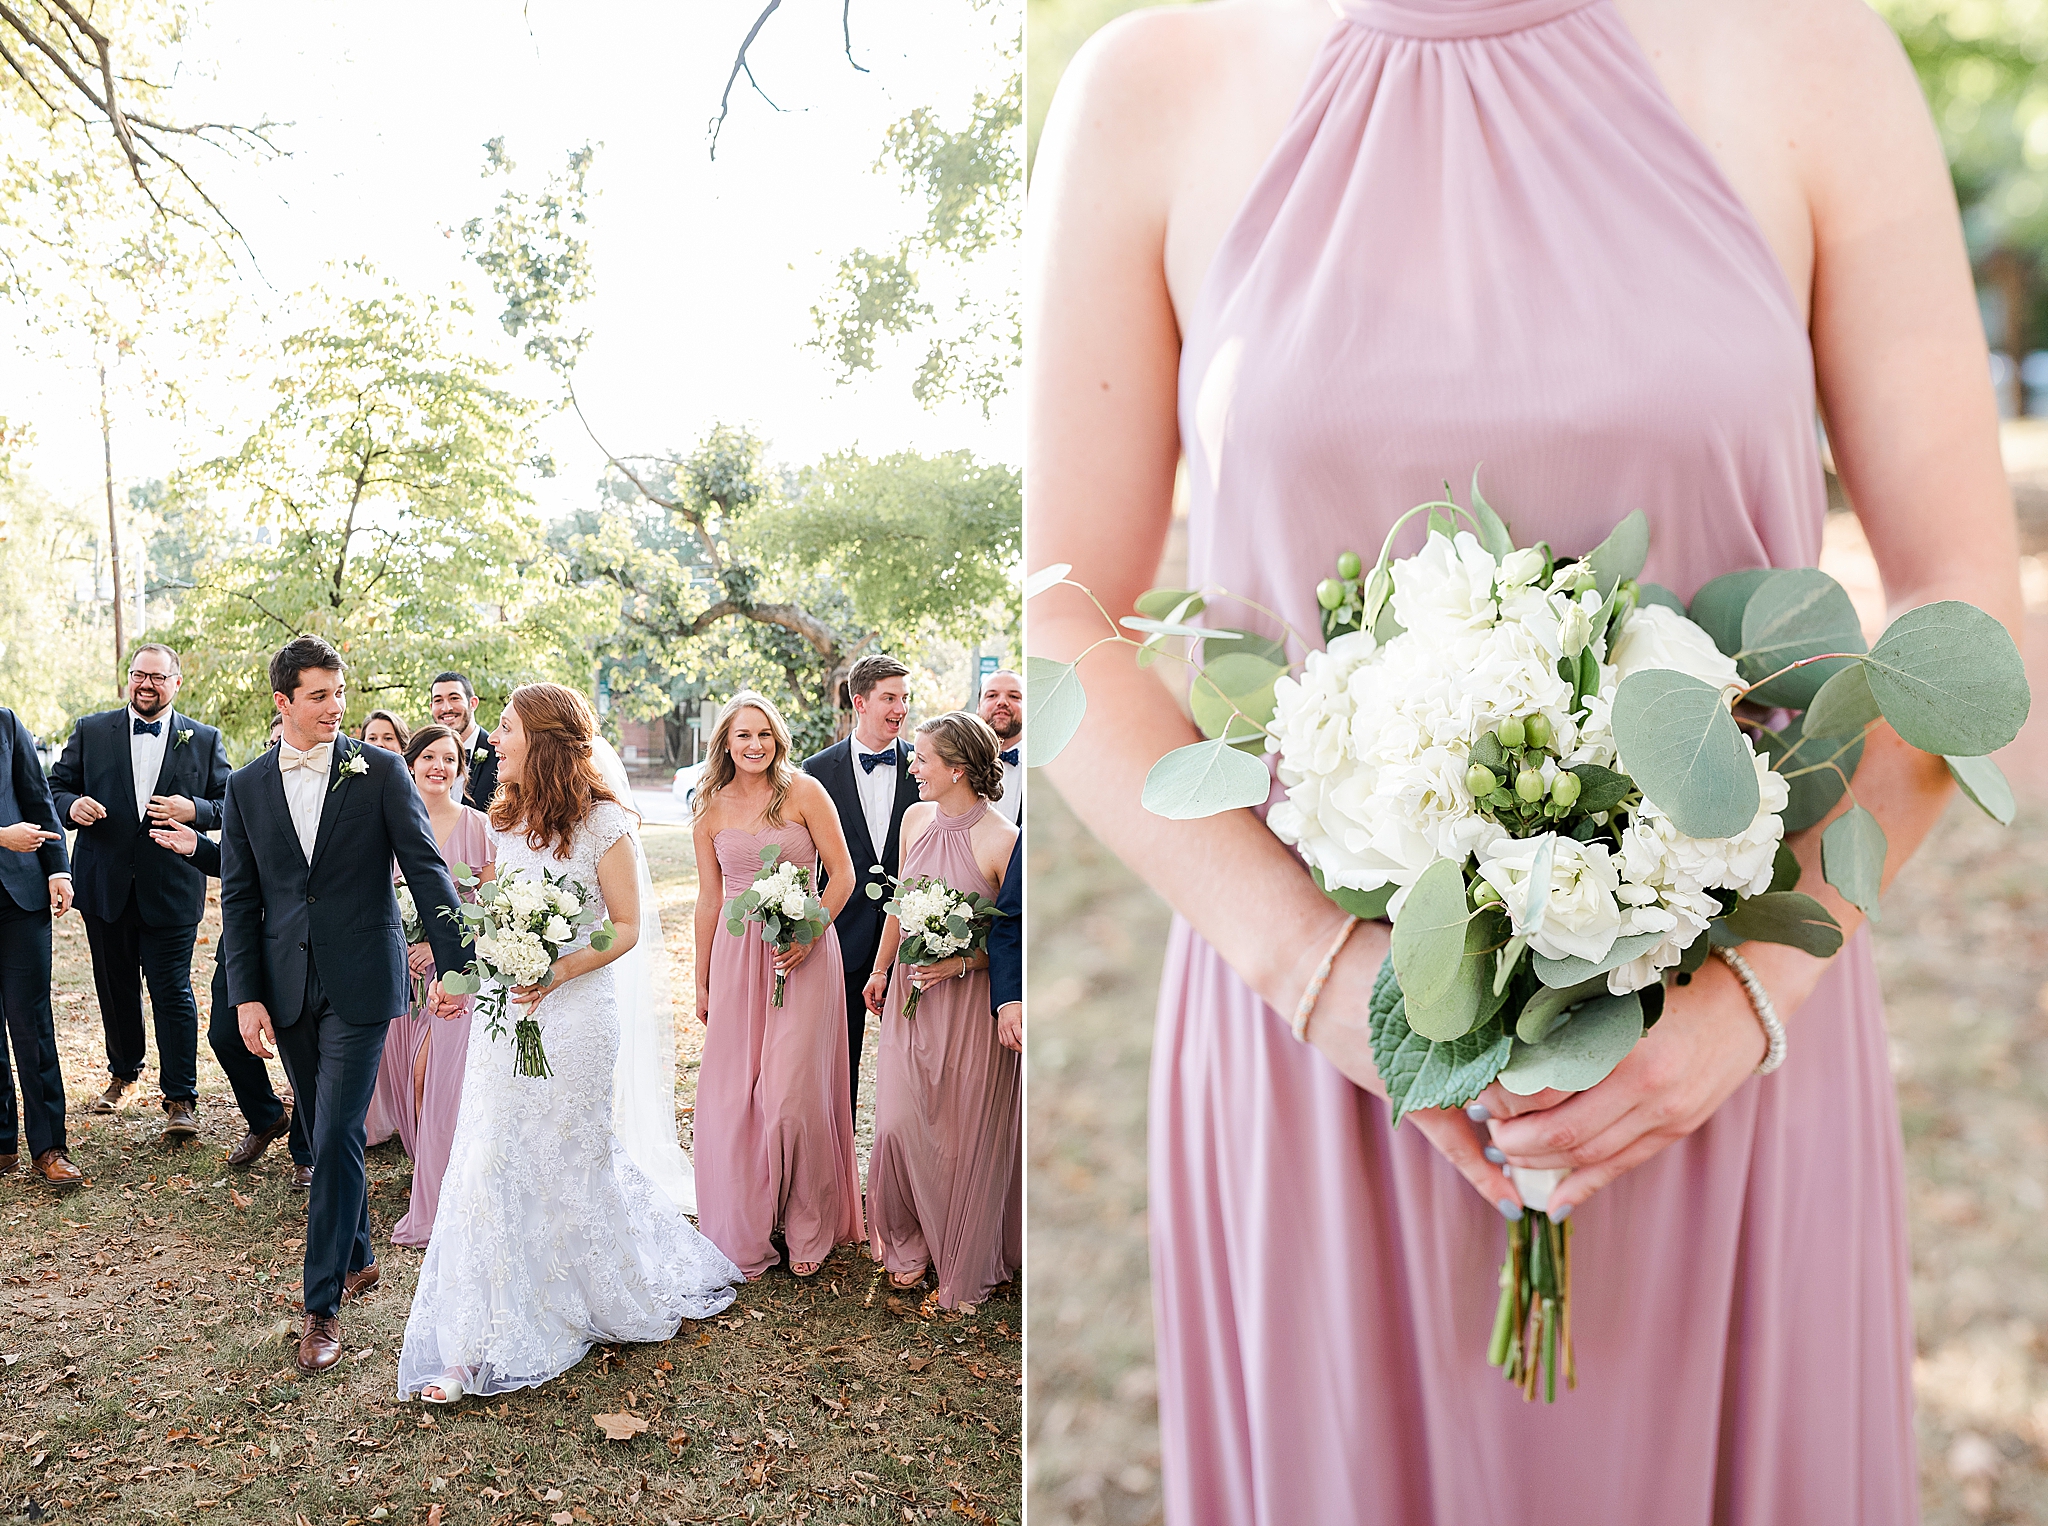 newlyweds walk with groomsmen and bridesmaids in pink gowns